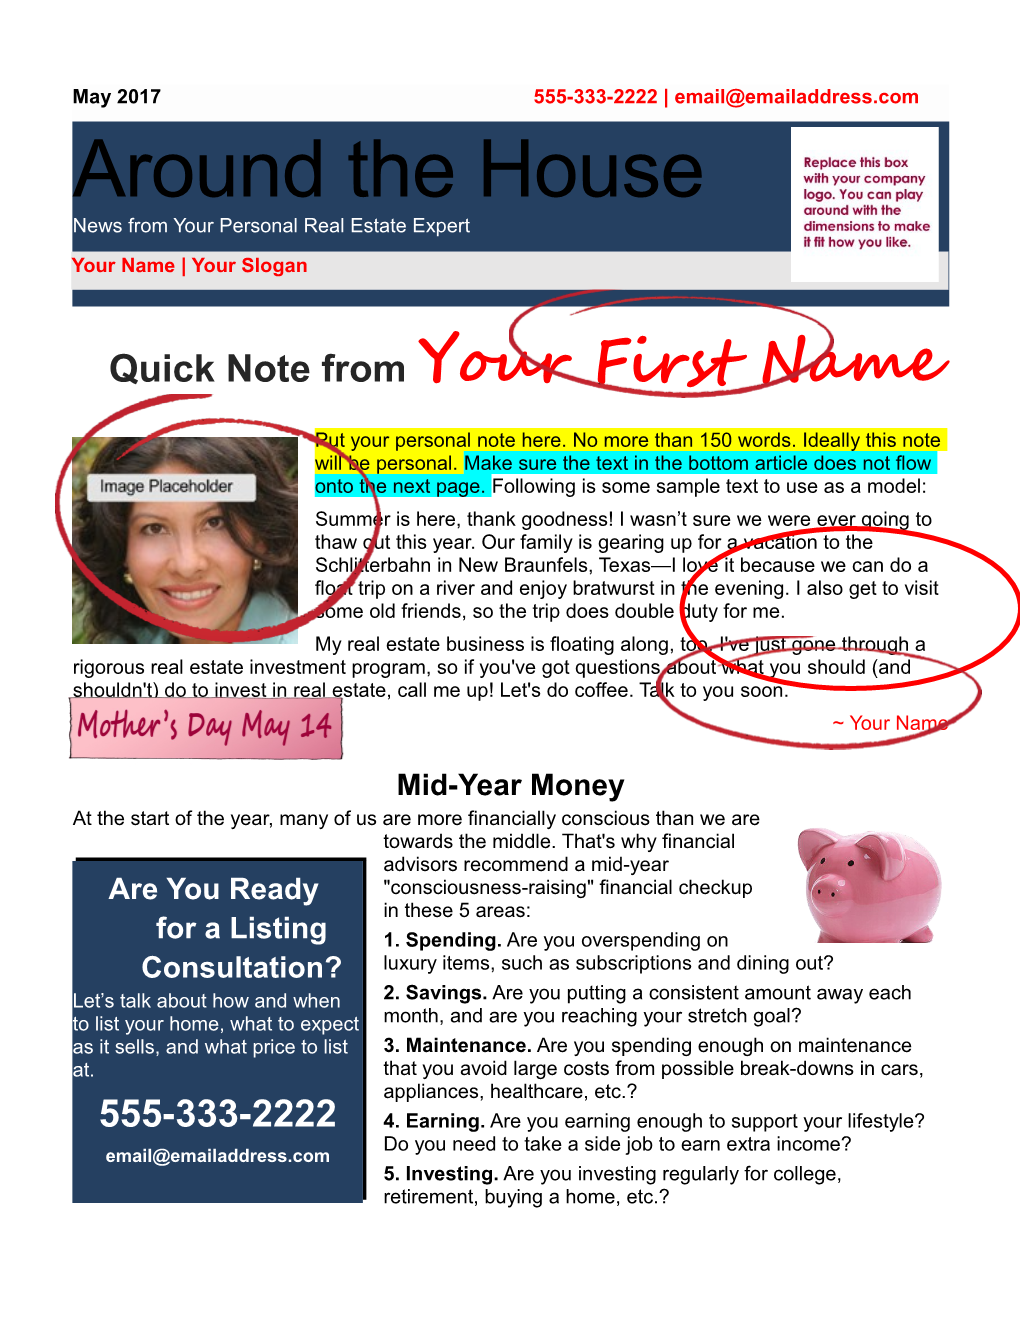 Quick Note from Your First Name